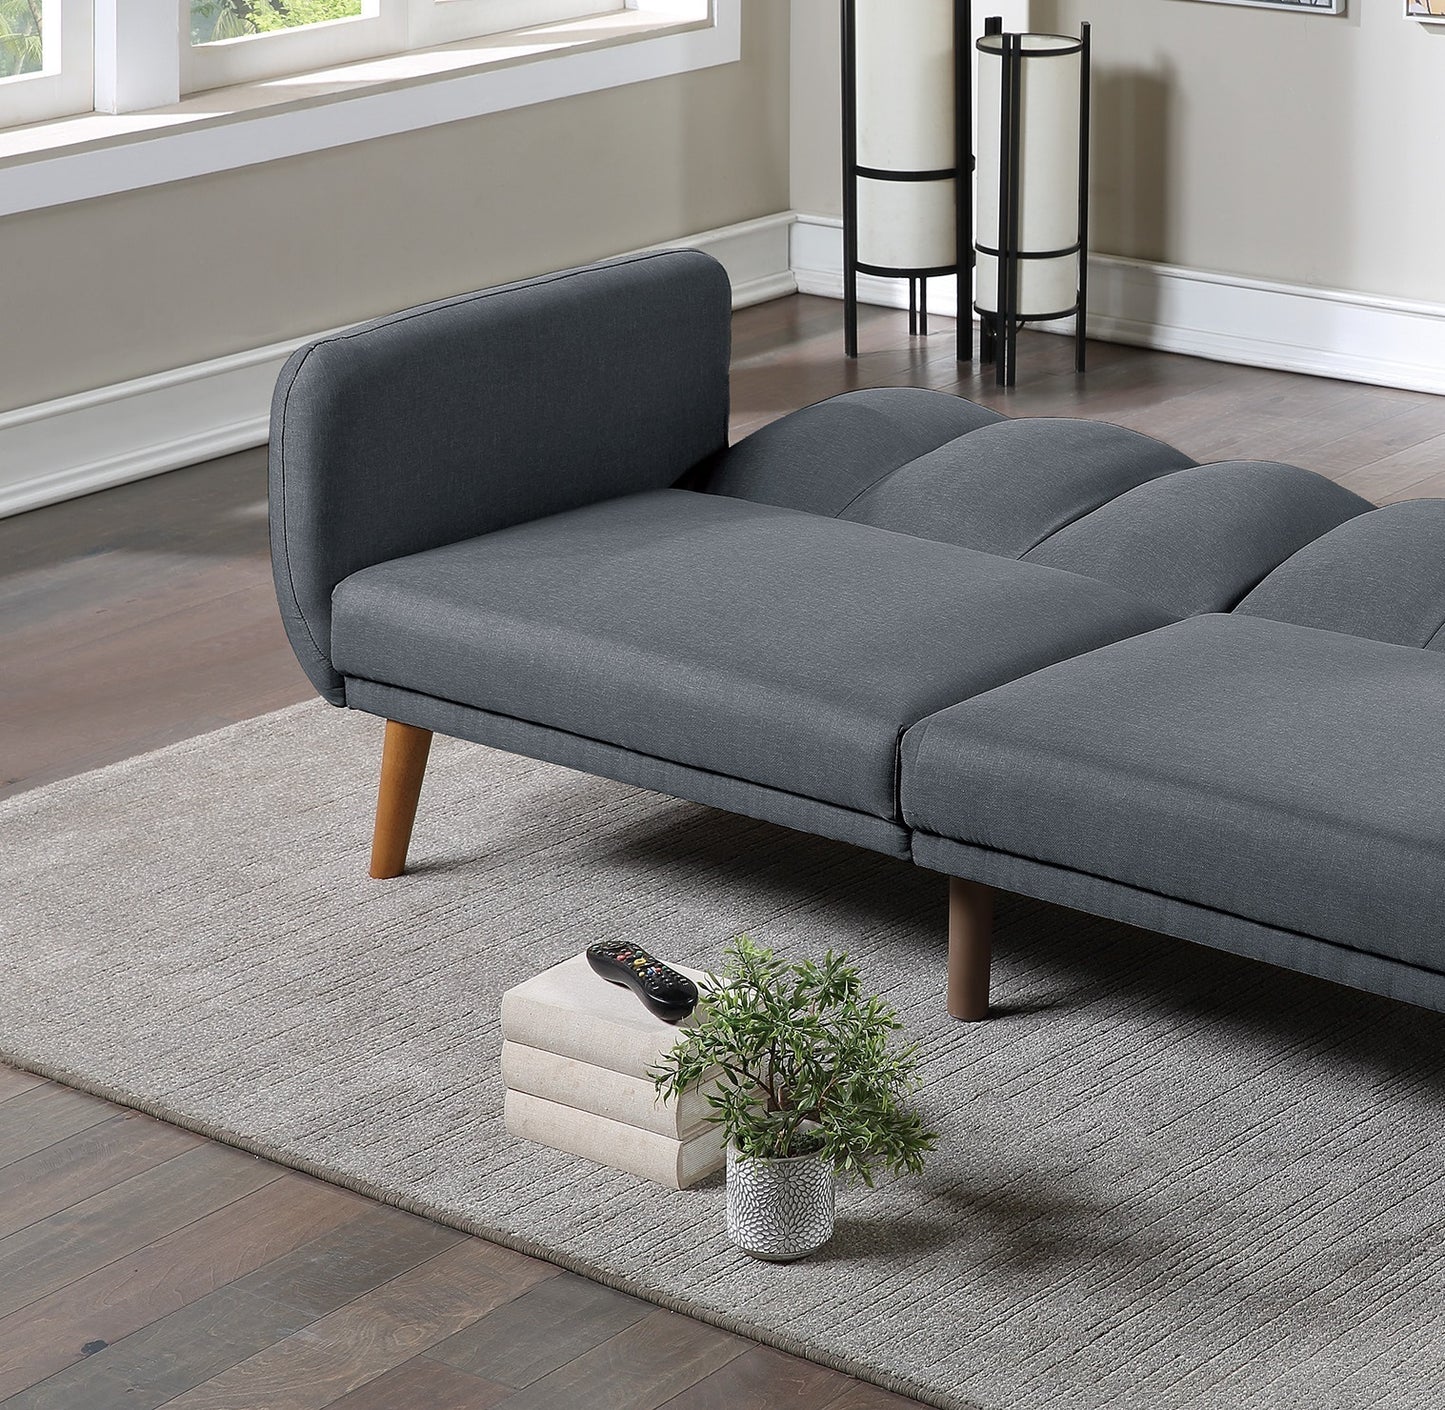 Blue-Grey Sofa, Convertible Bed, Wooden Legs, Lounge